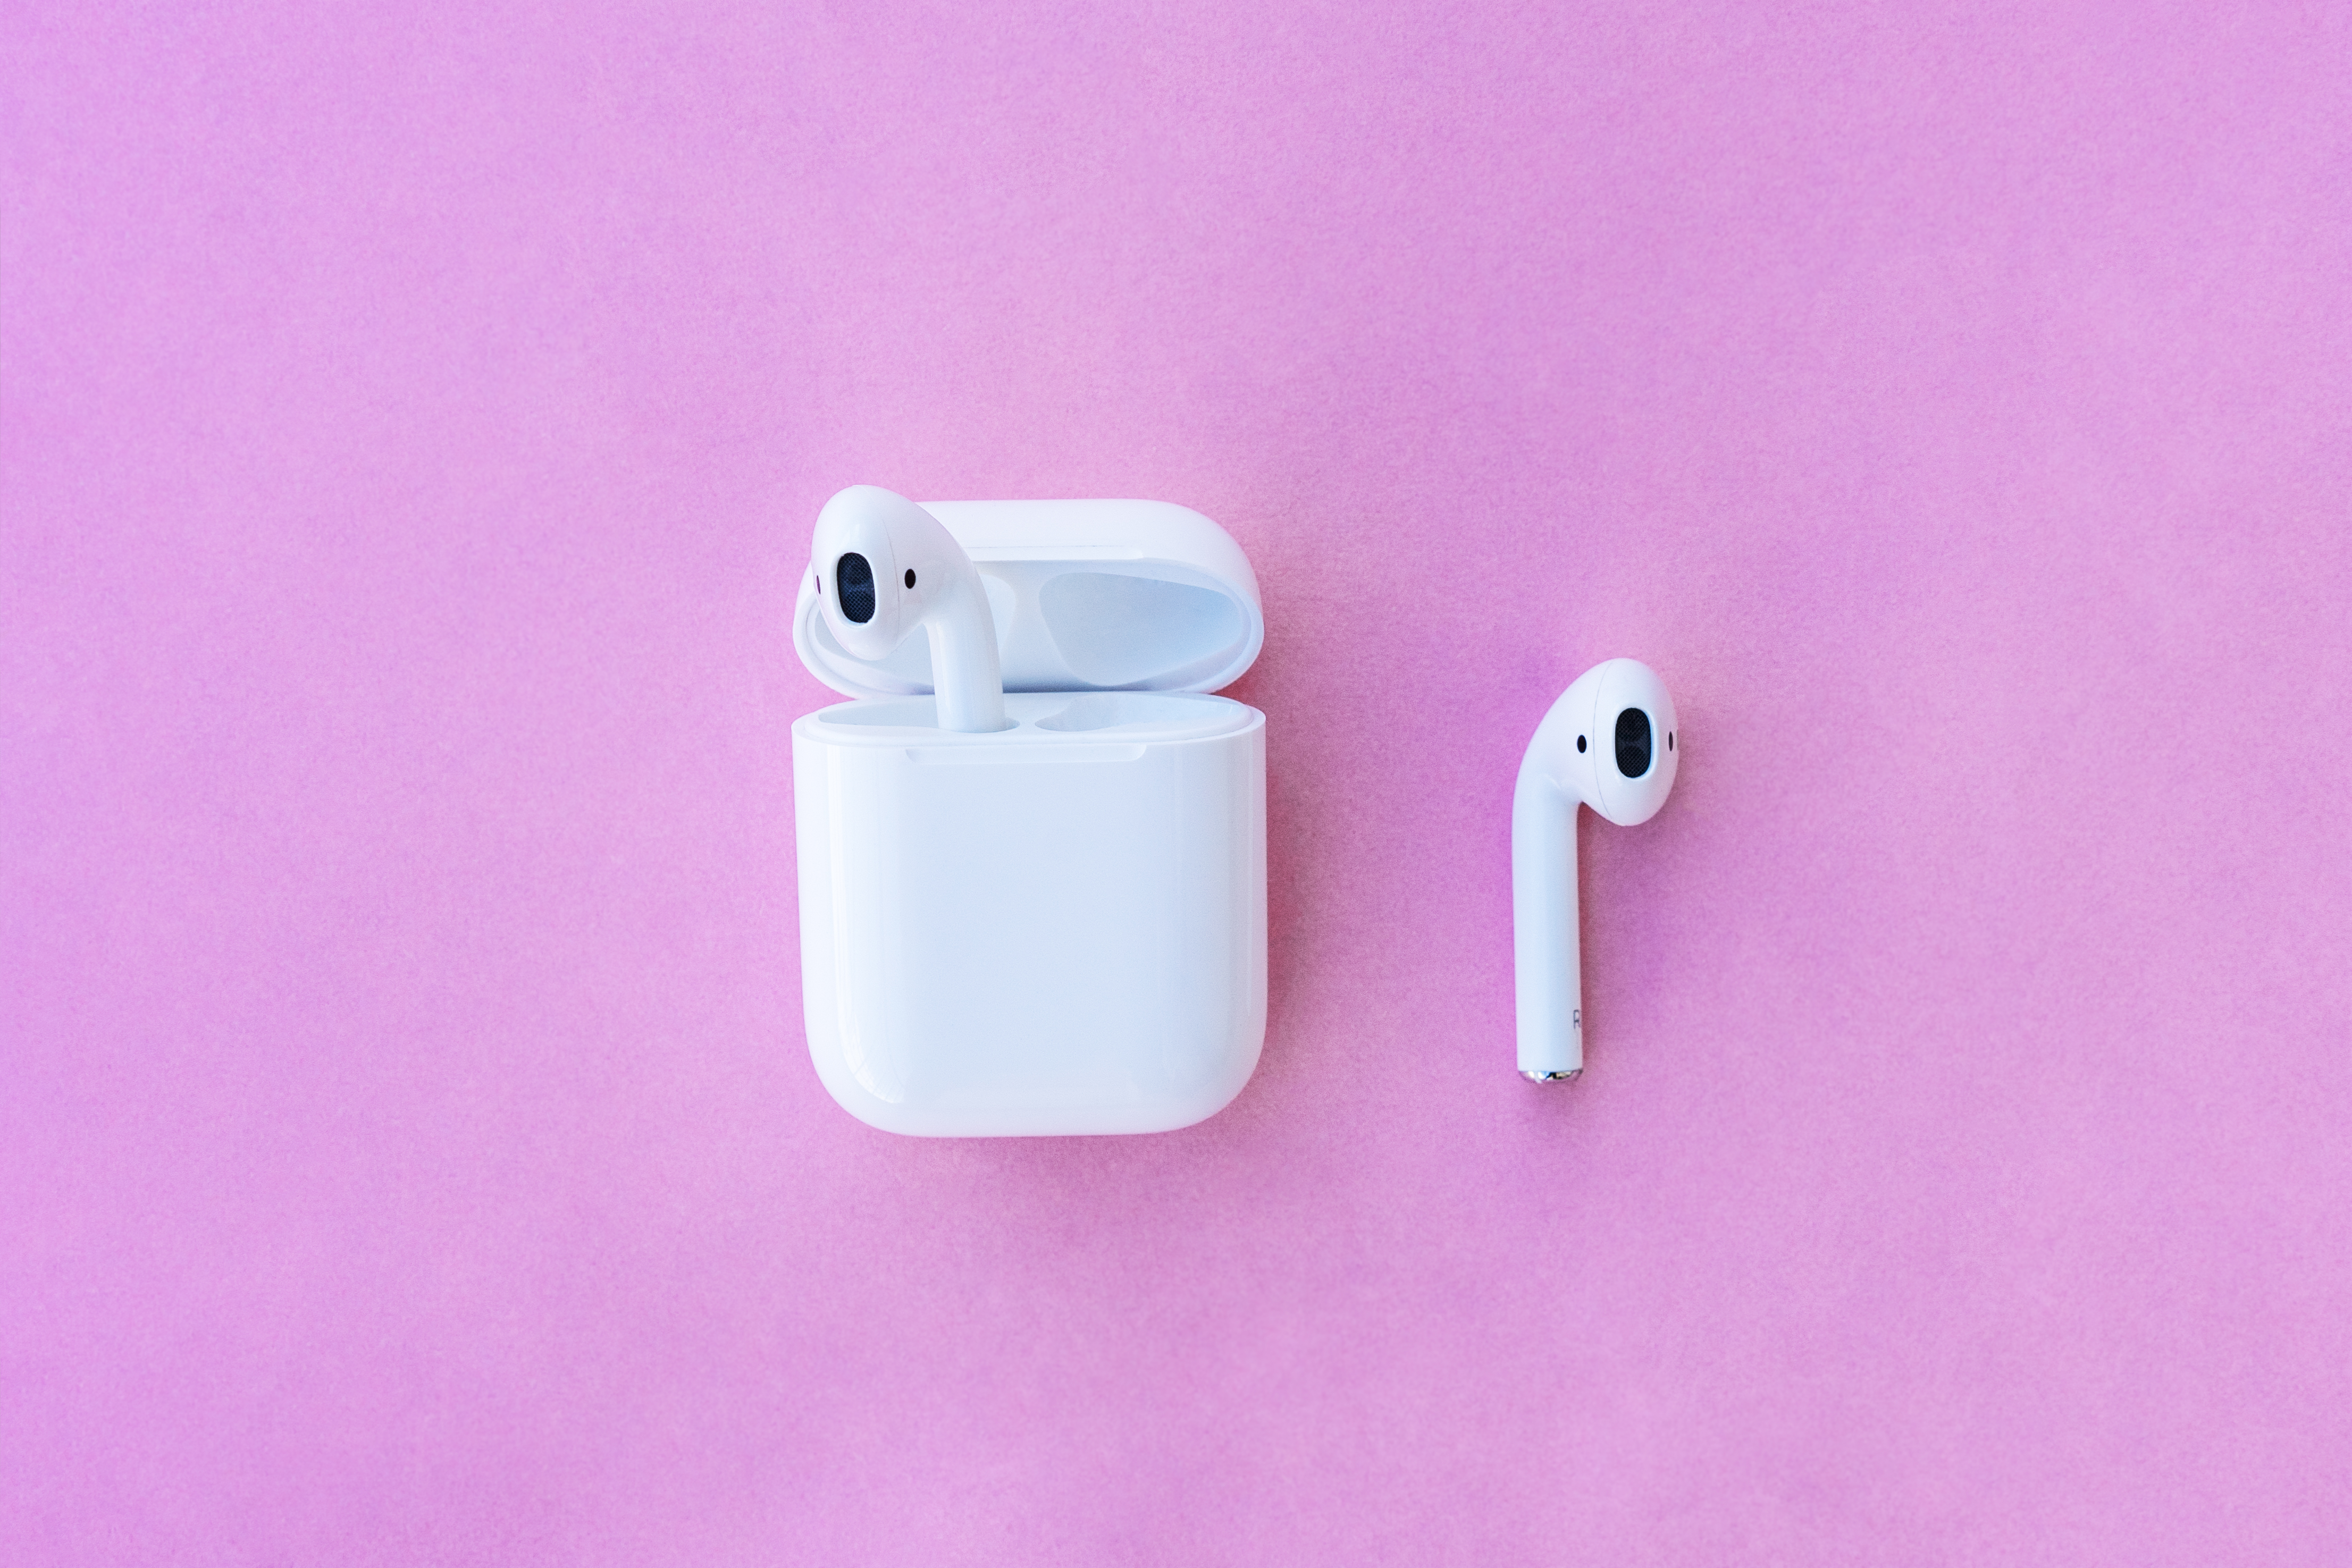 Apple AirPods For Their Lowest Price Ever